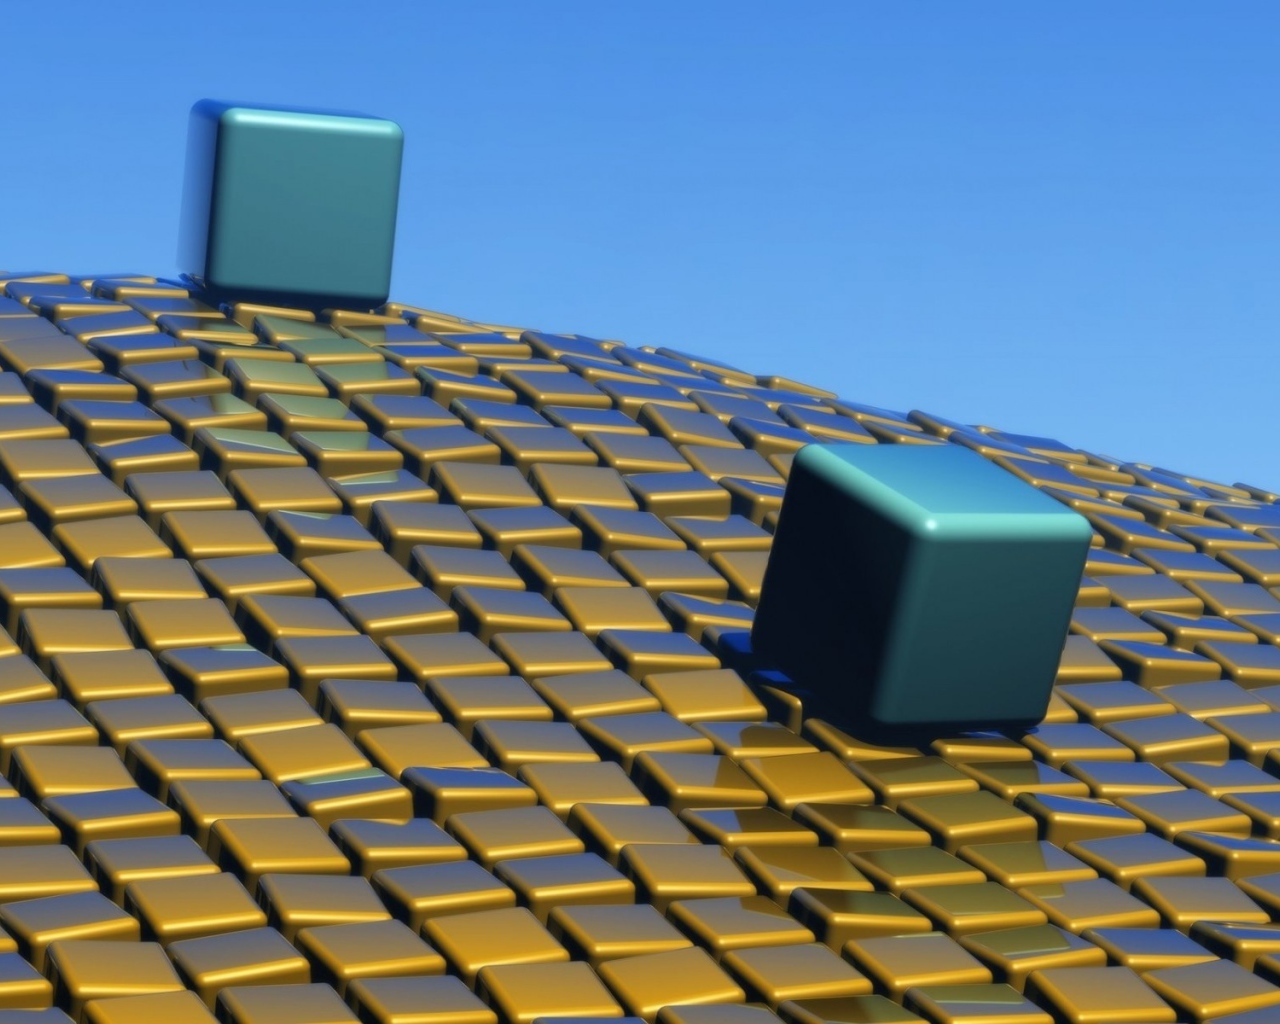 Two 3d cubes on an uneven geometric surface